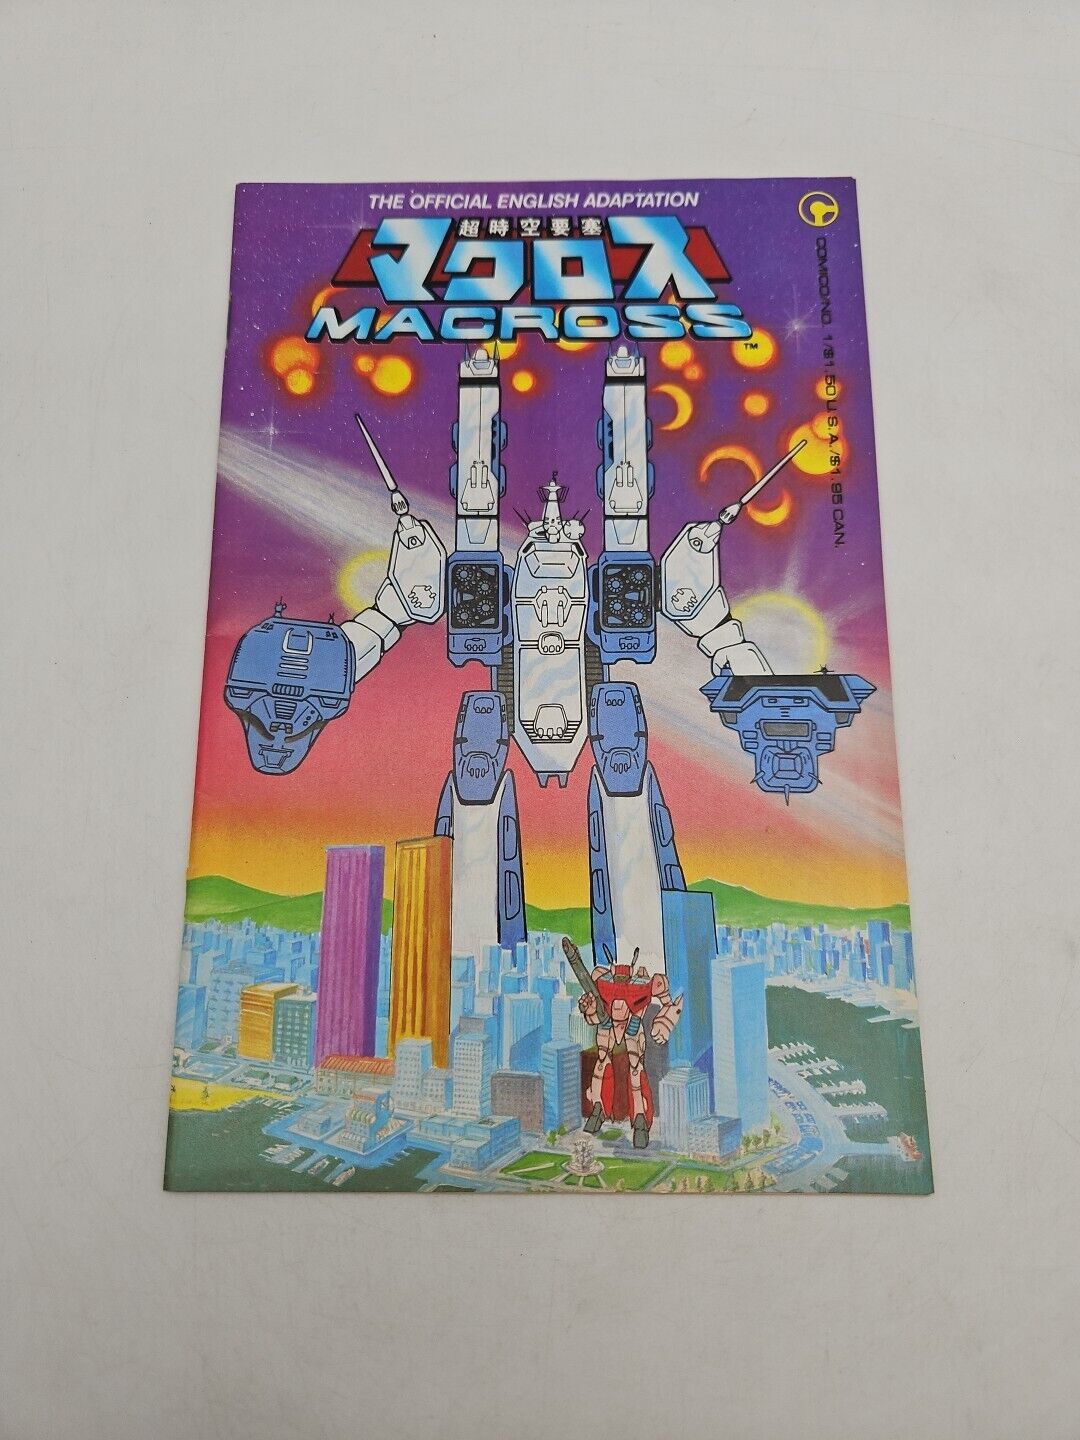 MACROSS # 1 - (COMICO 1984) - ROBOTECH - 1st APPEARANCE - FN/VF Extremely NICE